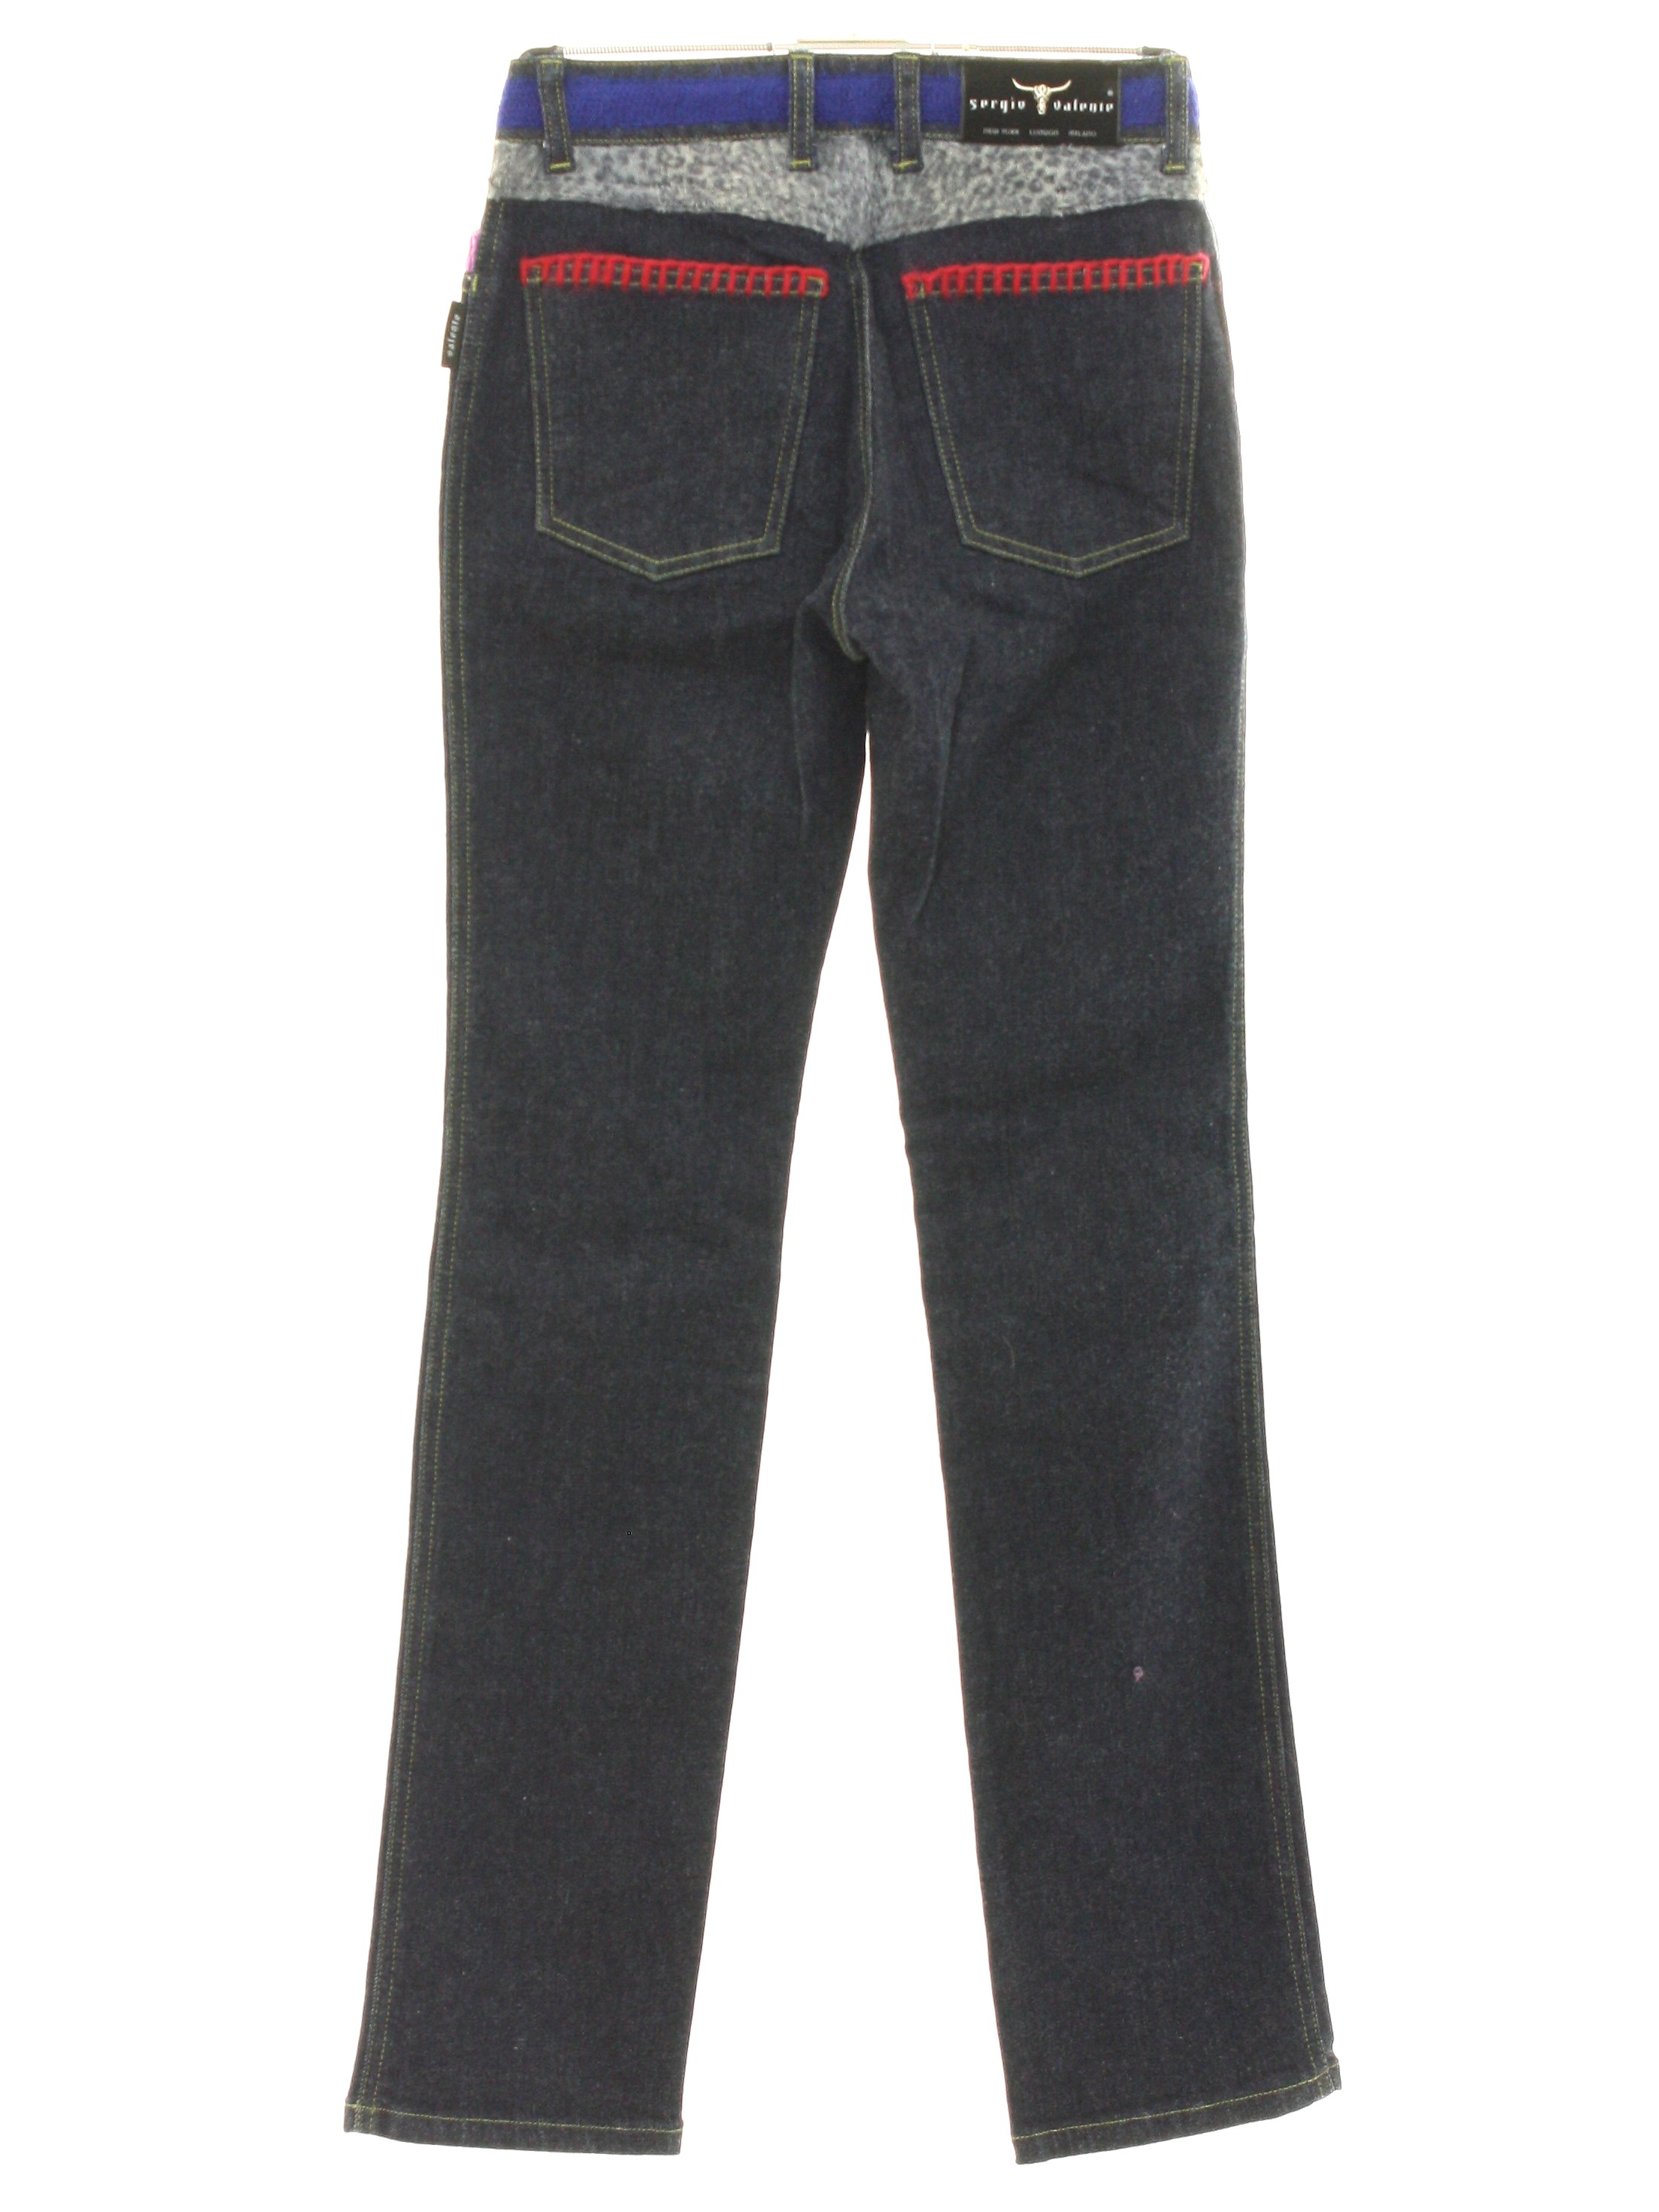 Buy Babyhug Full Length Washed Denim Jeans Medium Blue for Girls (5-6Years)  Online in India, Shop at FirstCry.com - 11626942